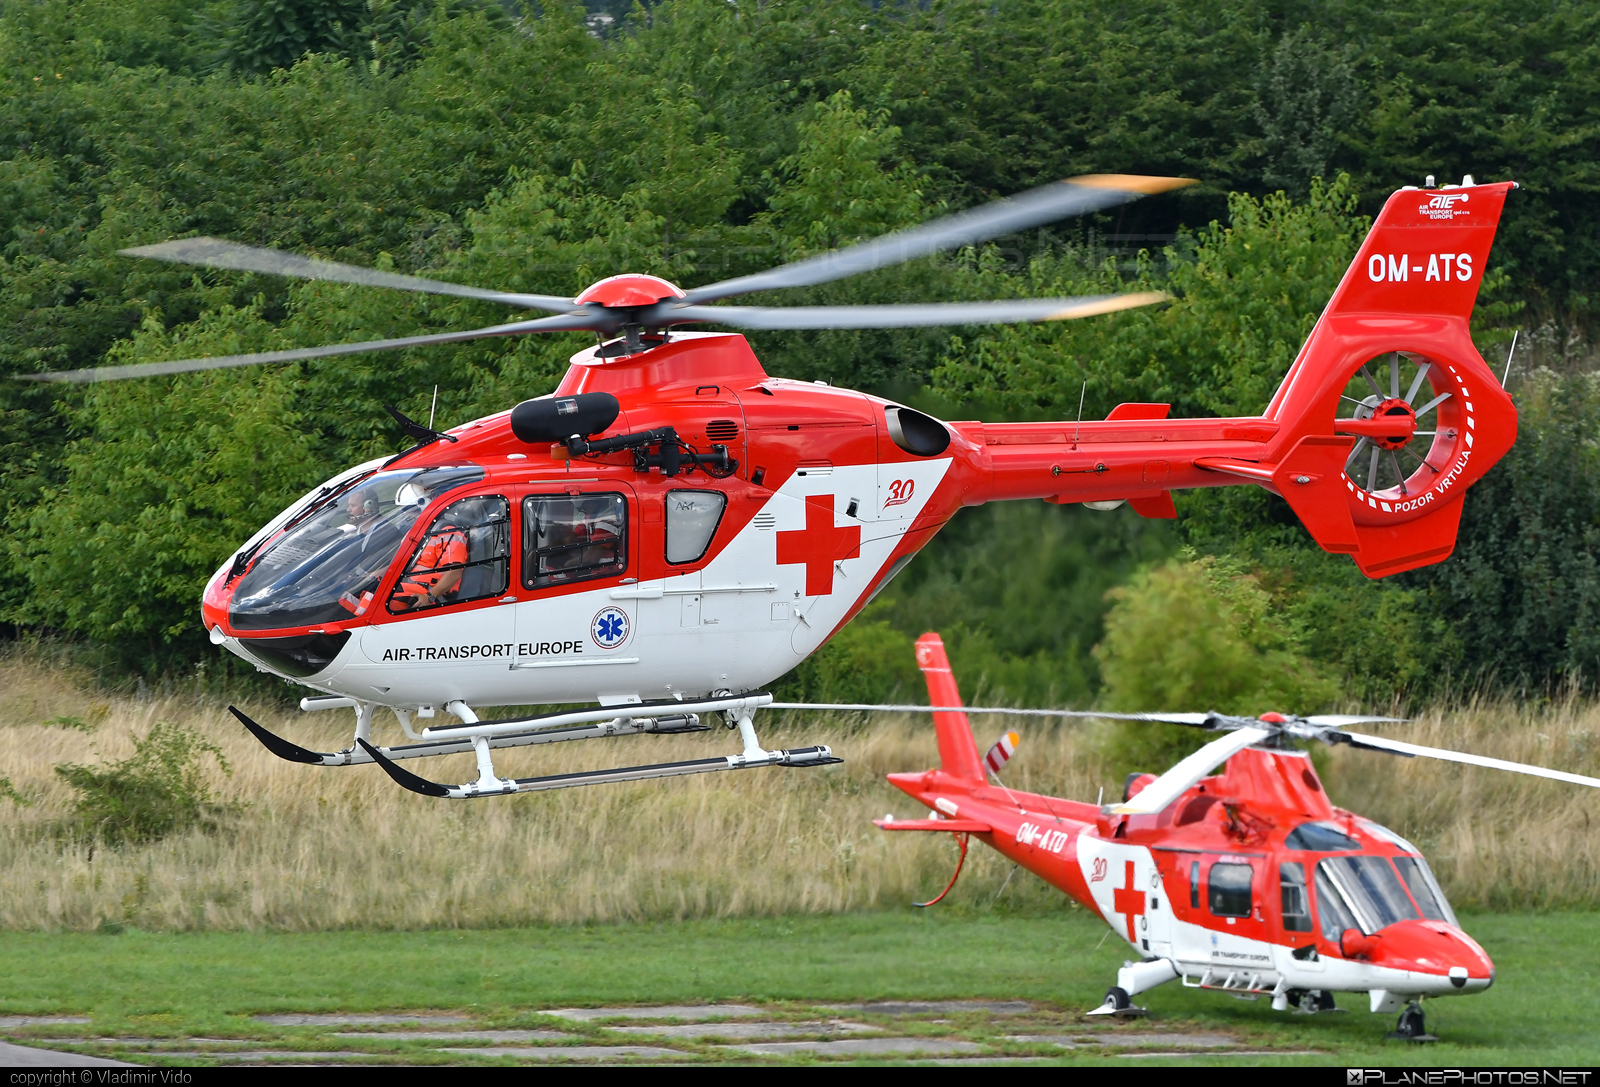 Eurocopter EC135 P2+ - OM-ATS operated by Air Transport Europe #airtransporteurope #ec135 #ec135p2 #ec135p2plus #eurocopter